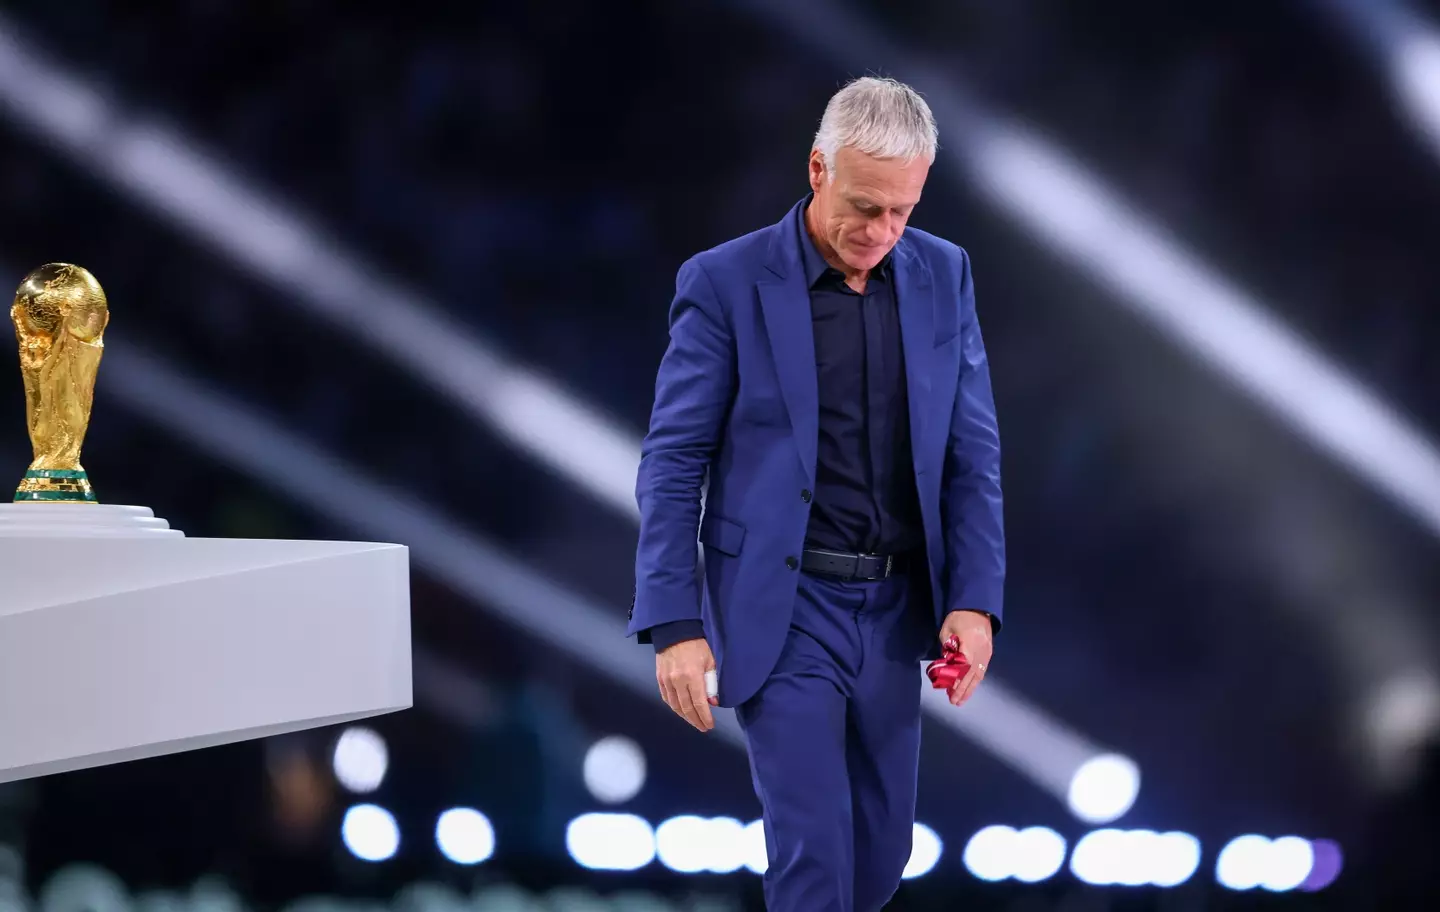 Didier Deschamps fell short of leading France to back-to-back World Cup titles.